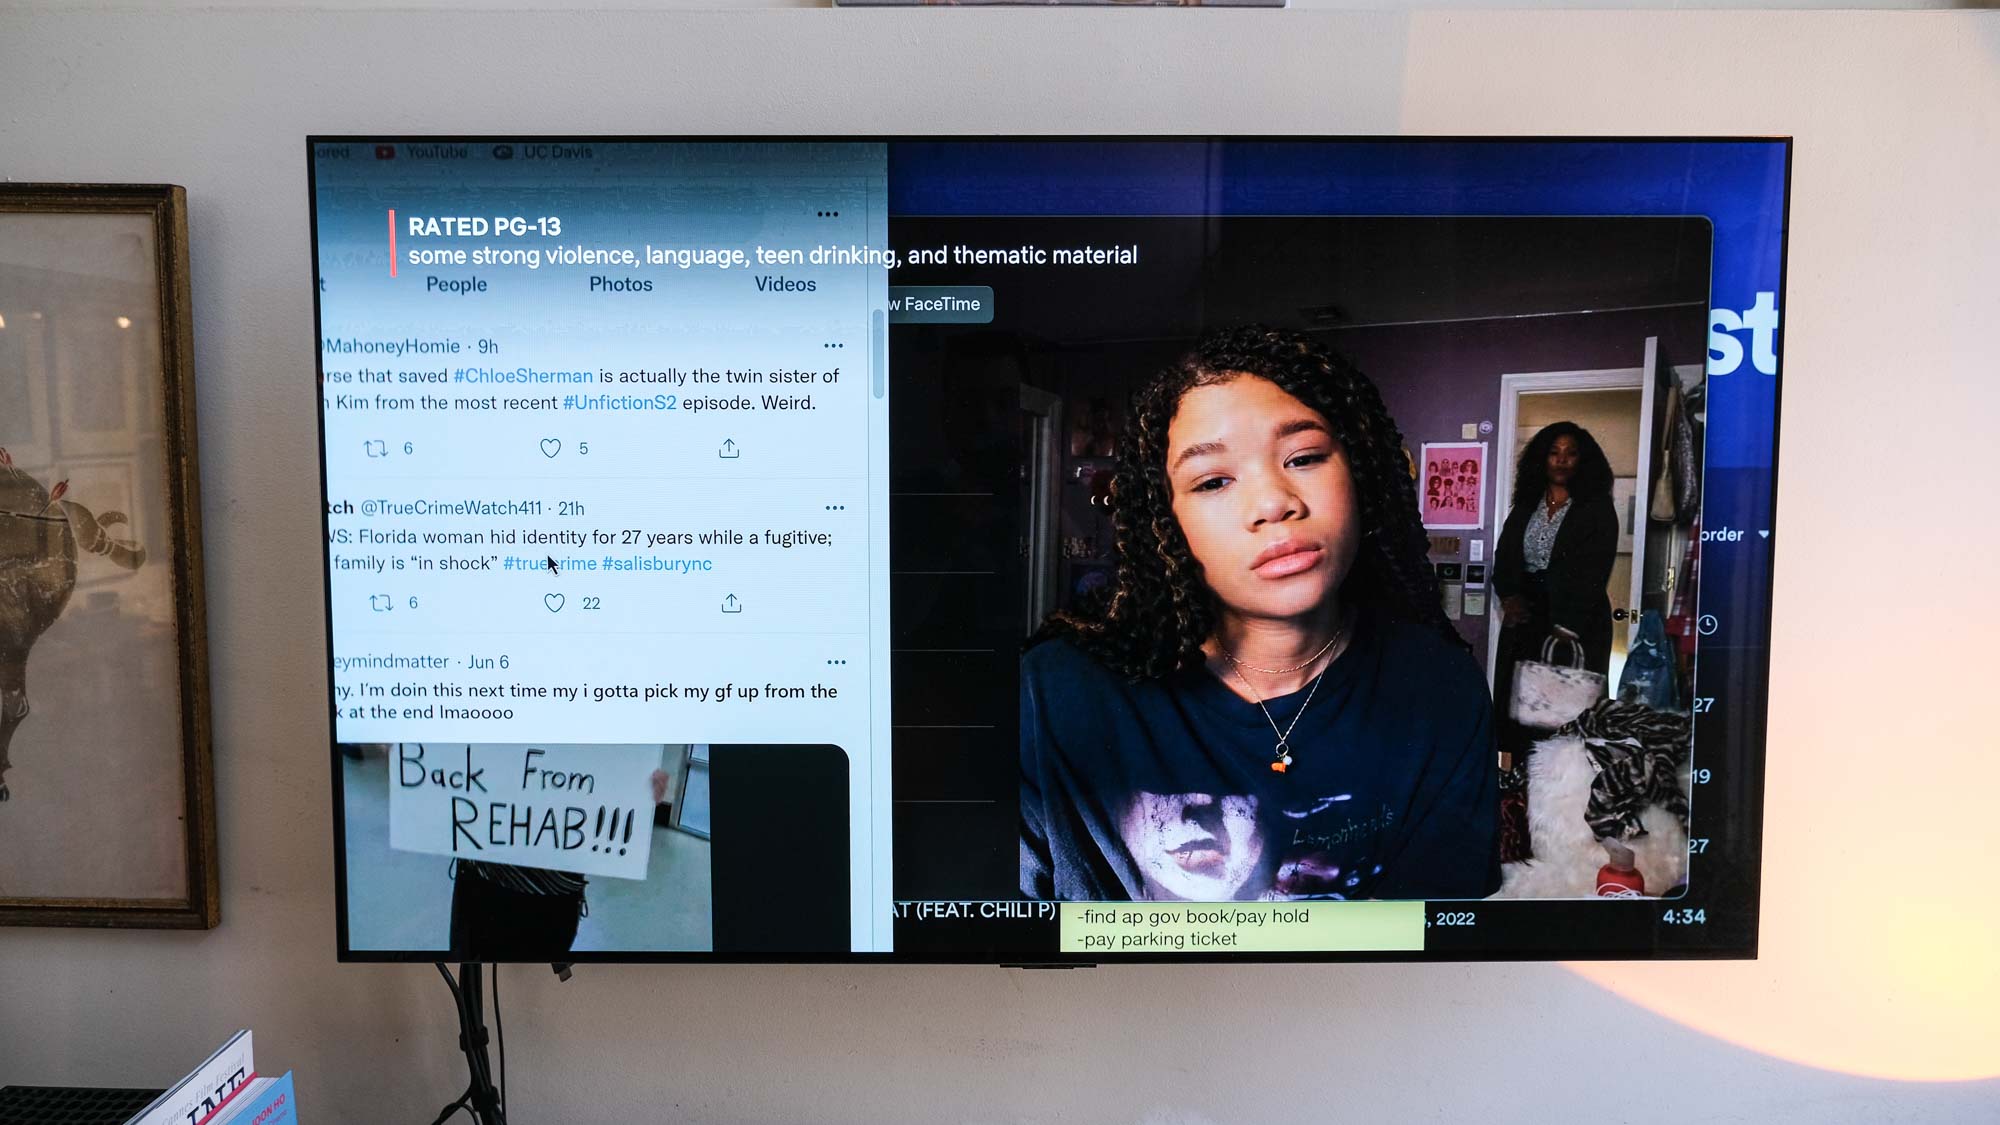 Storm Reid's TV show June in Missing plays from a Google TV 4K streaming box